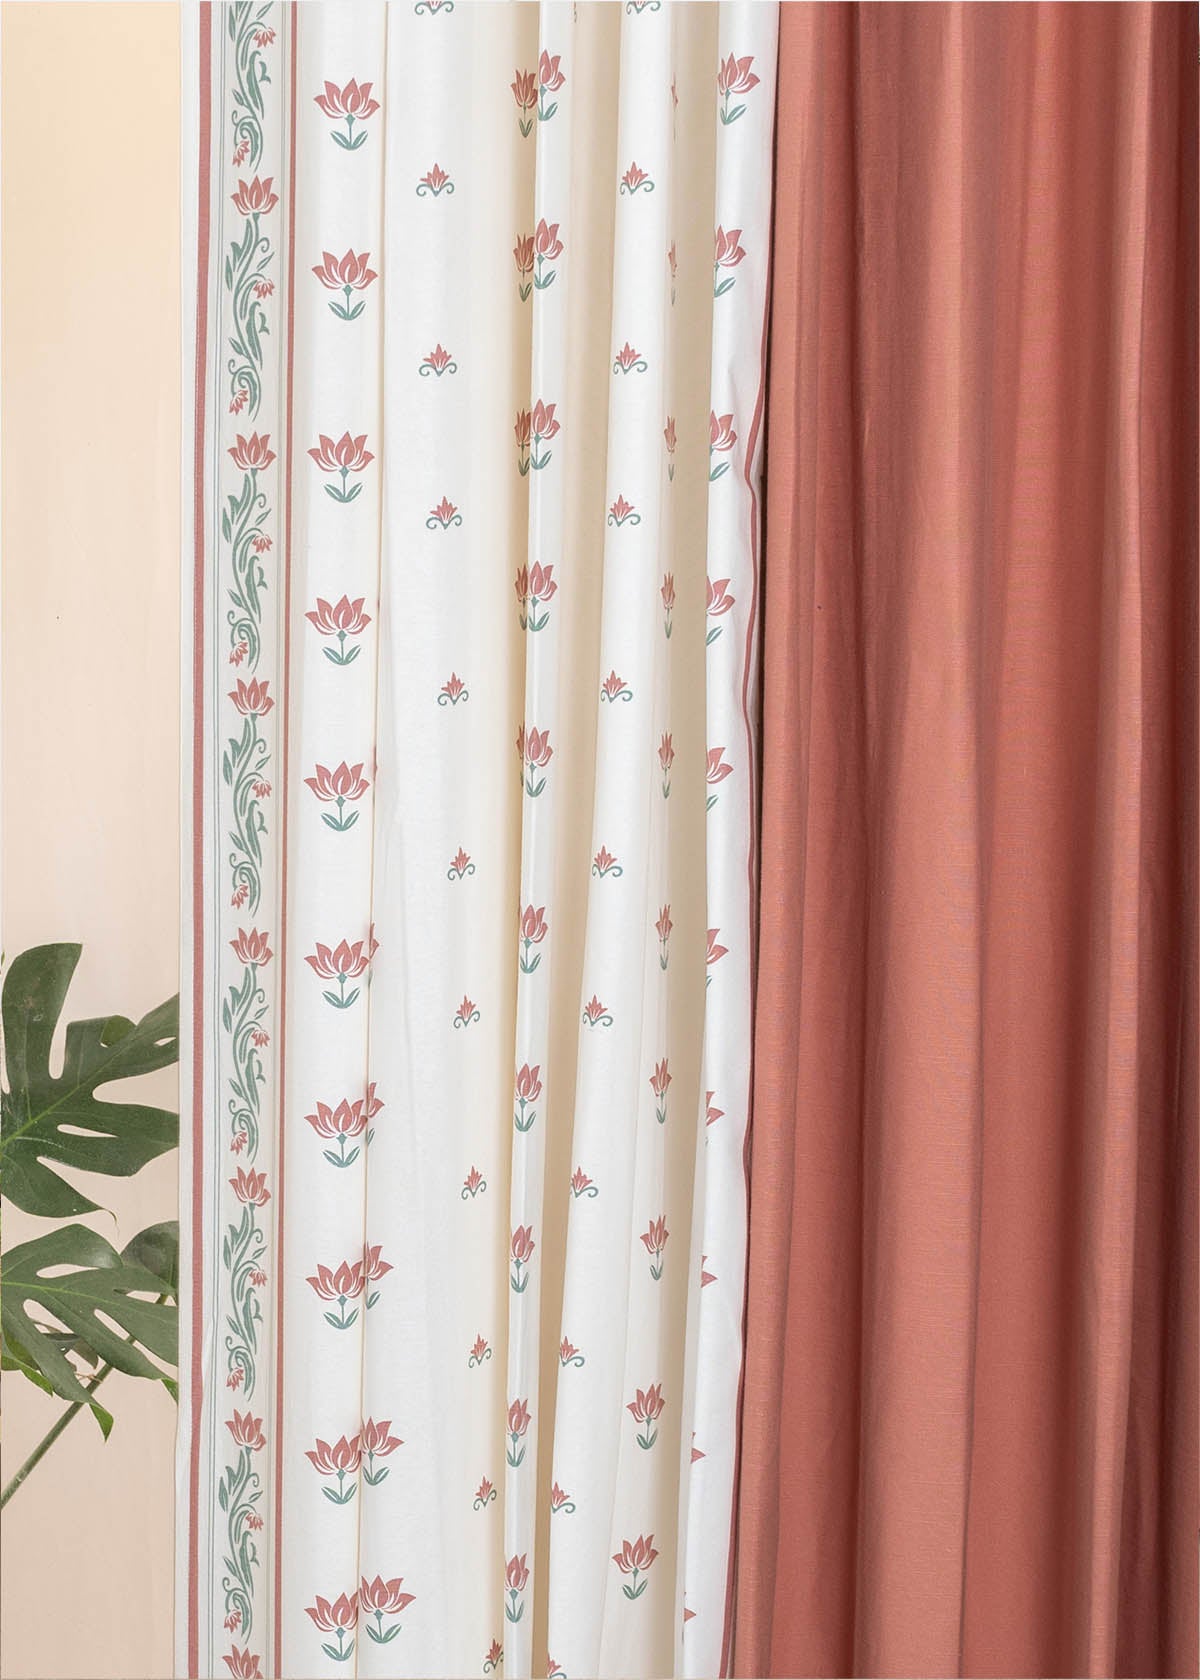 Rust Solid, Lotus Pond Set Of 4 Combo Cotton Curtain - Rust And Off White